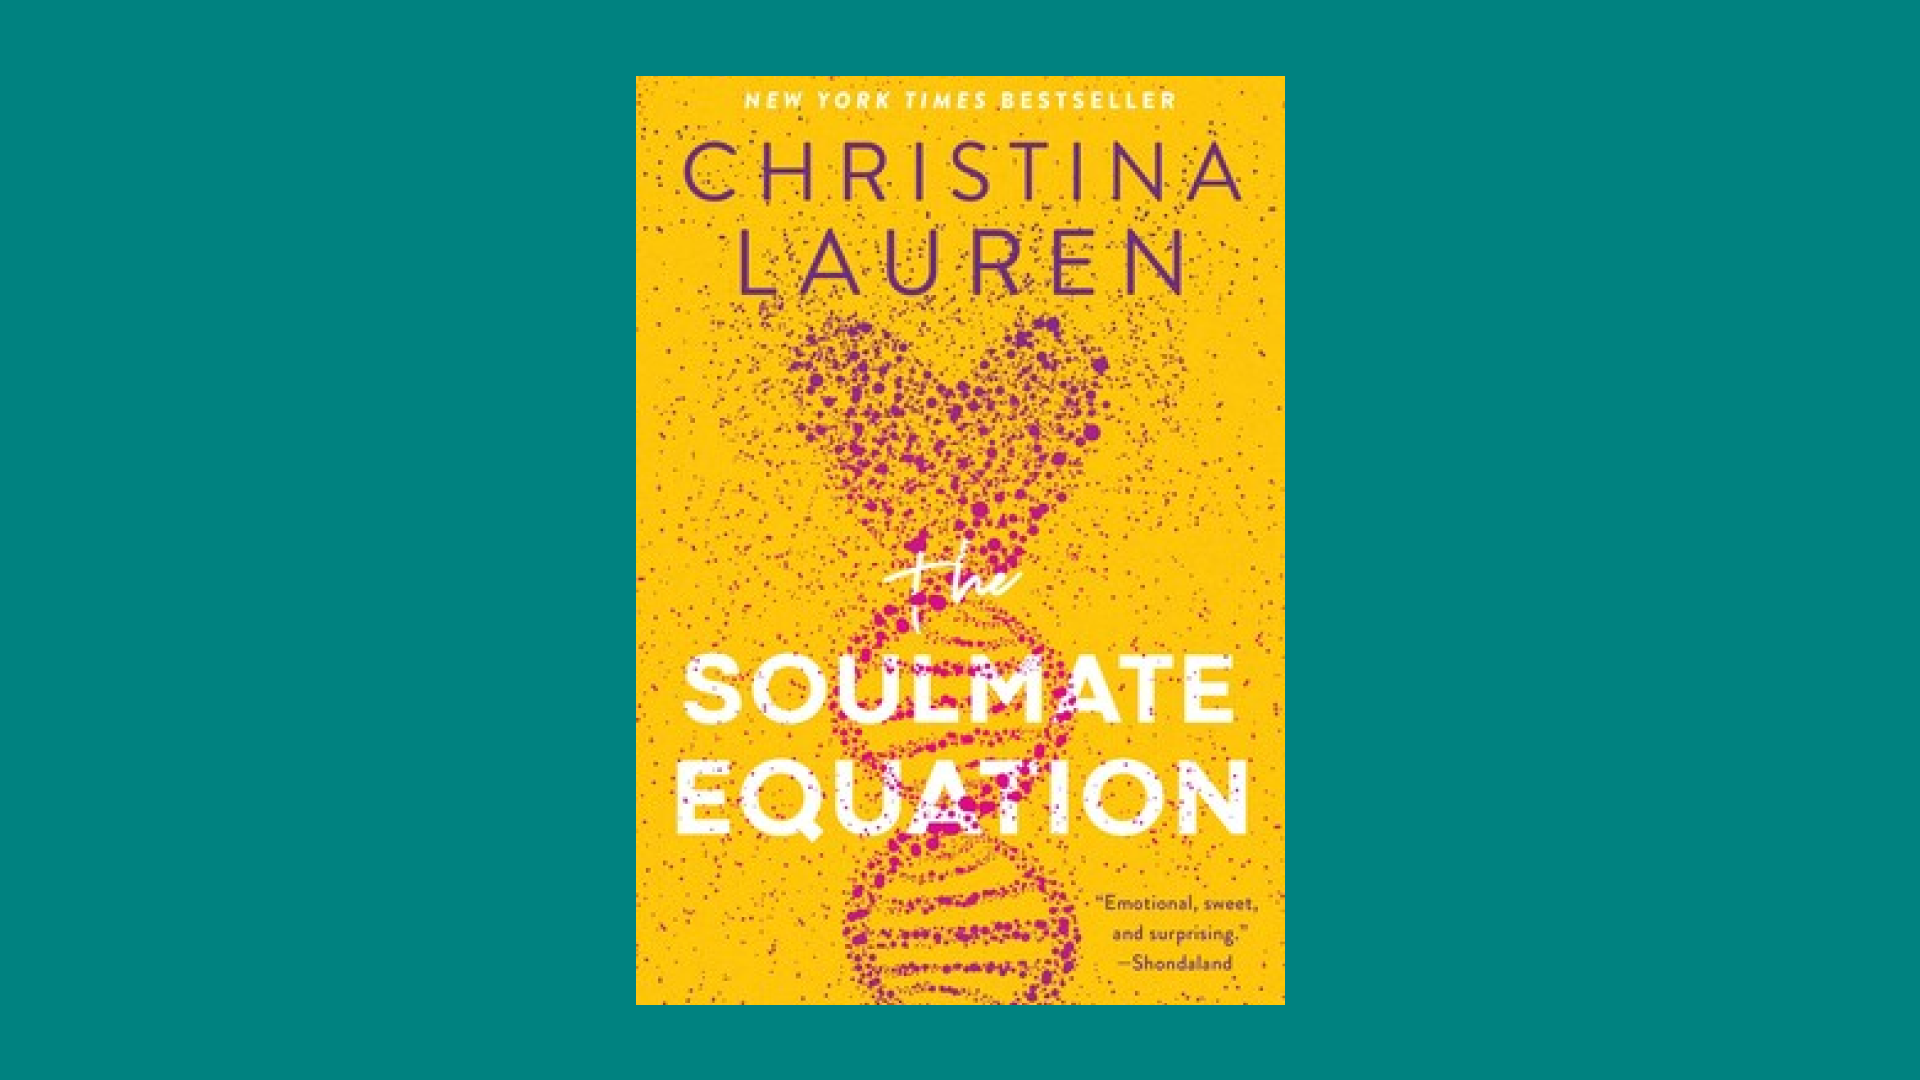 “The Soulmate Equation” by Christina Lauren